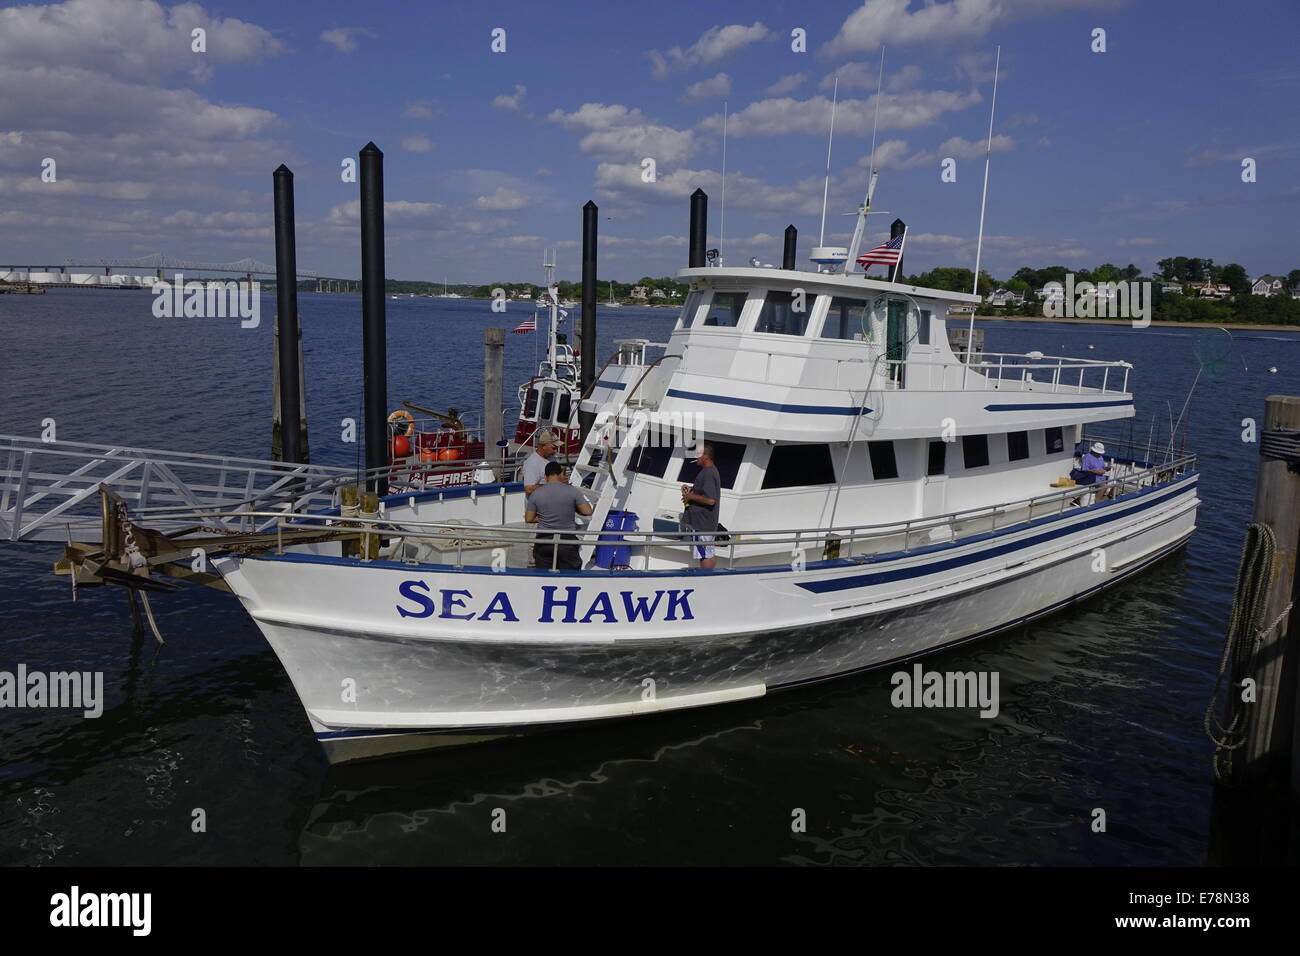 The Sea Hawk, moored at Perth Amboy, New Jersey, is a fishing and party boat Stock Photo